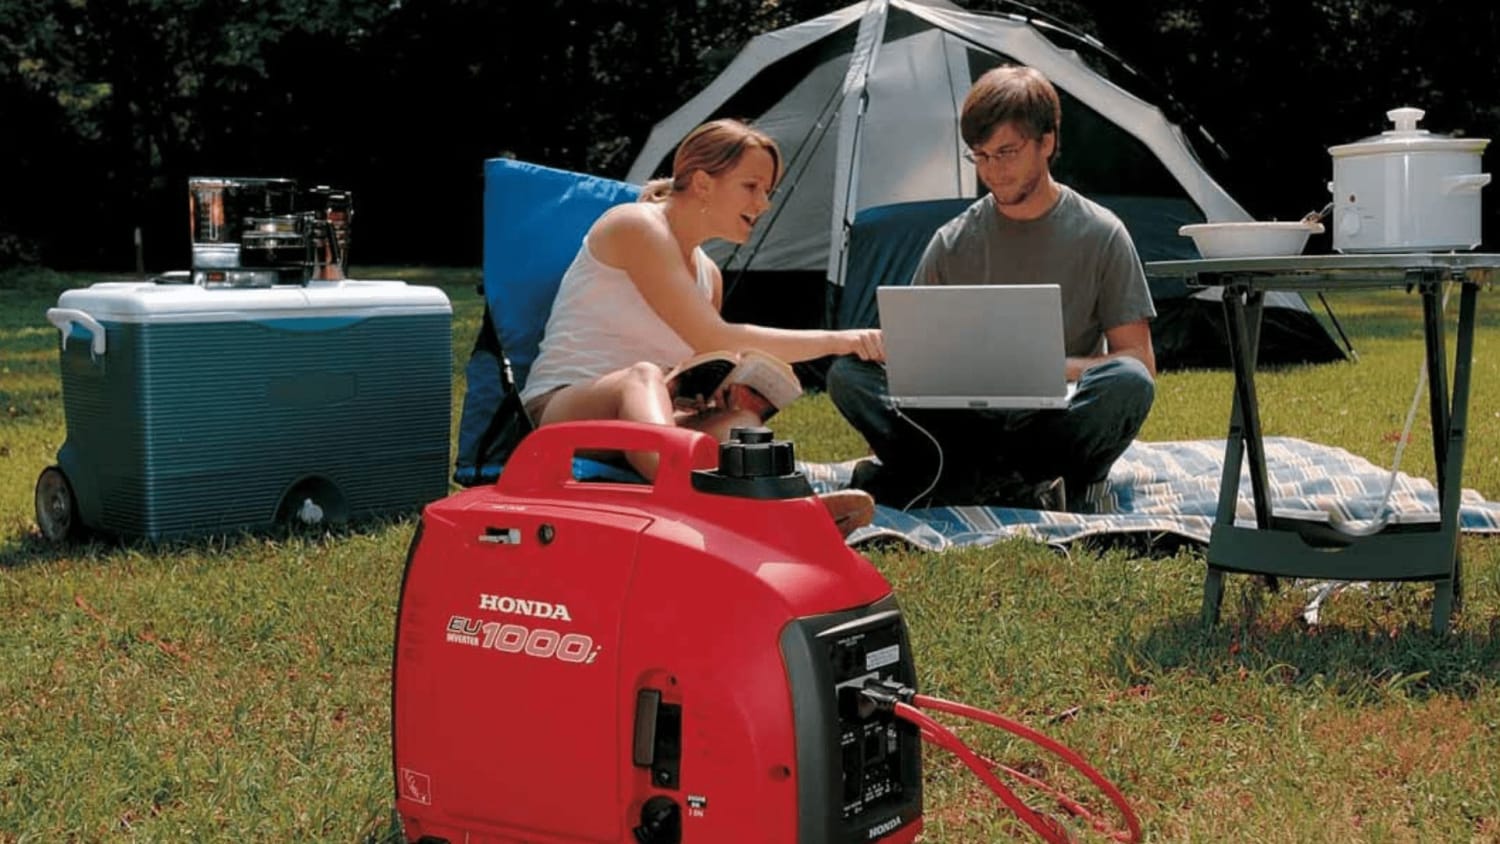 How to choose generator for home, work, and camping